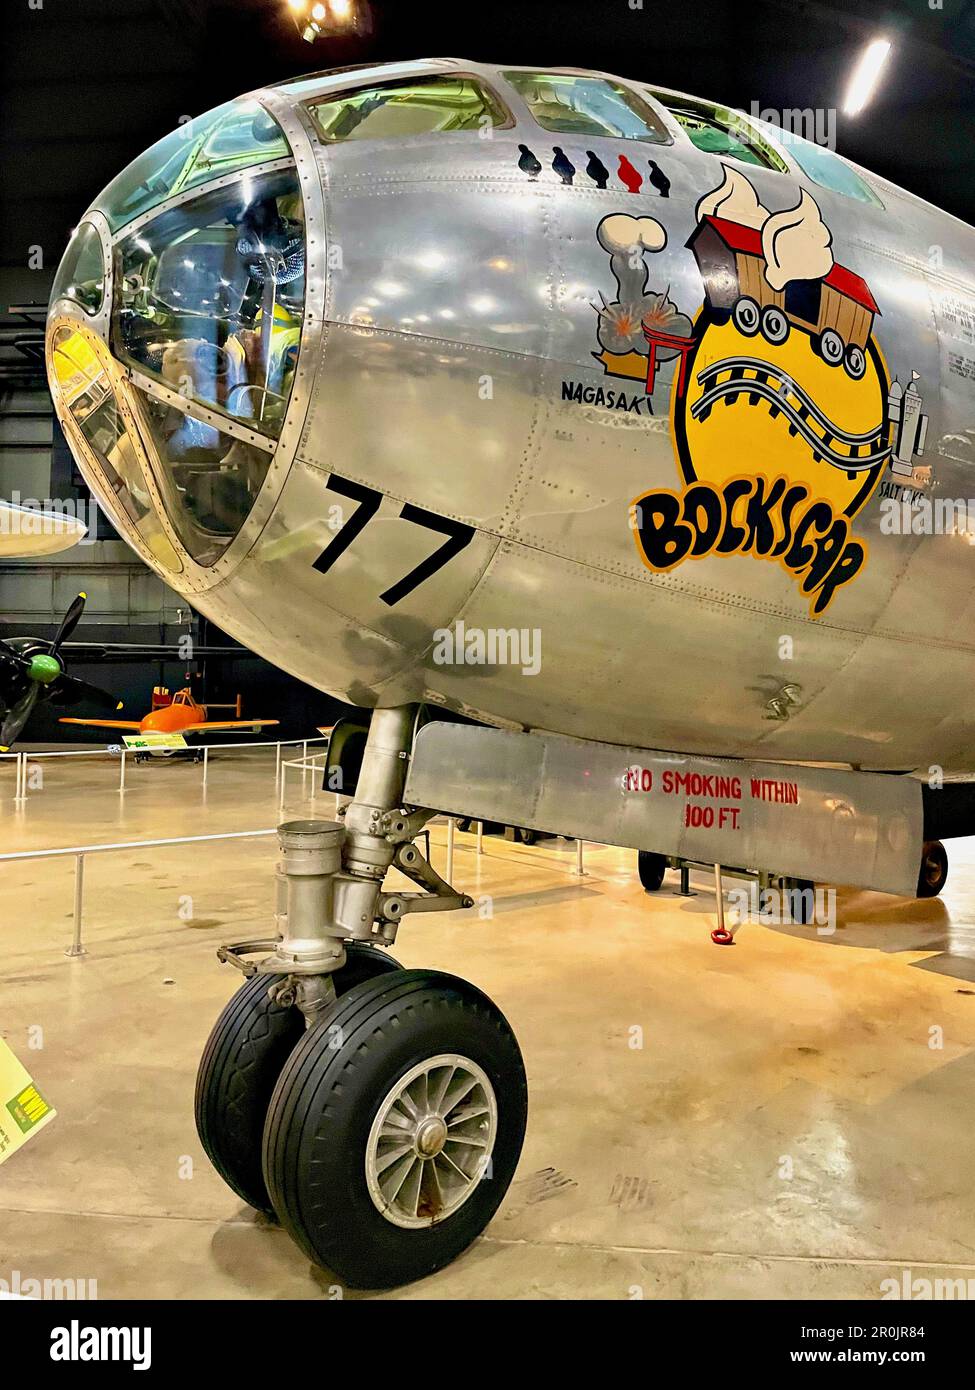 The Silverplate B-29: Delivering the Atomic Bombs